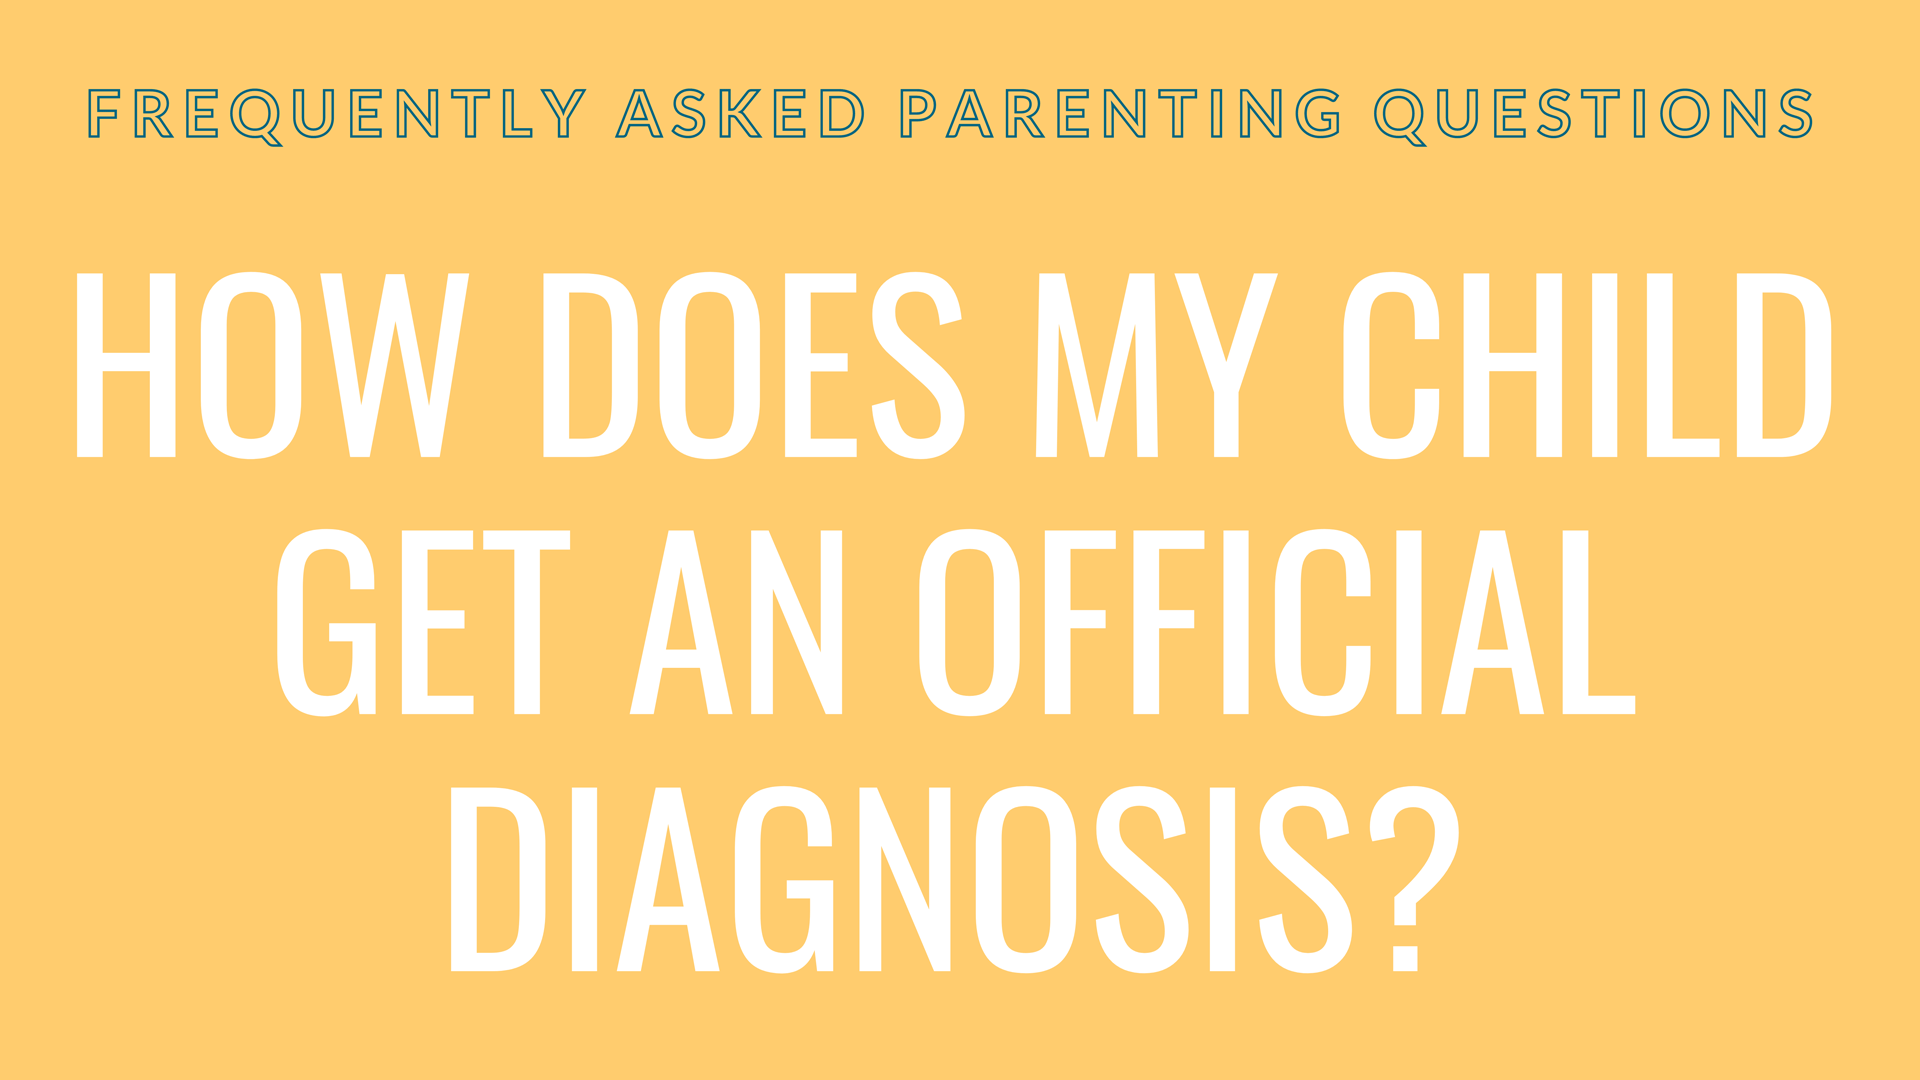 How does my child get an official diagnosis?